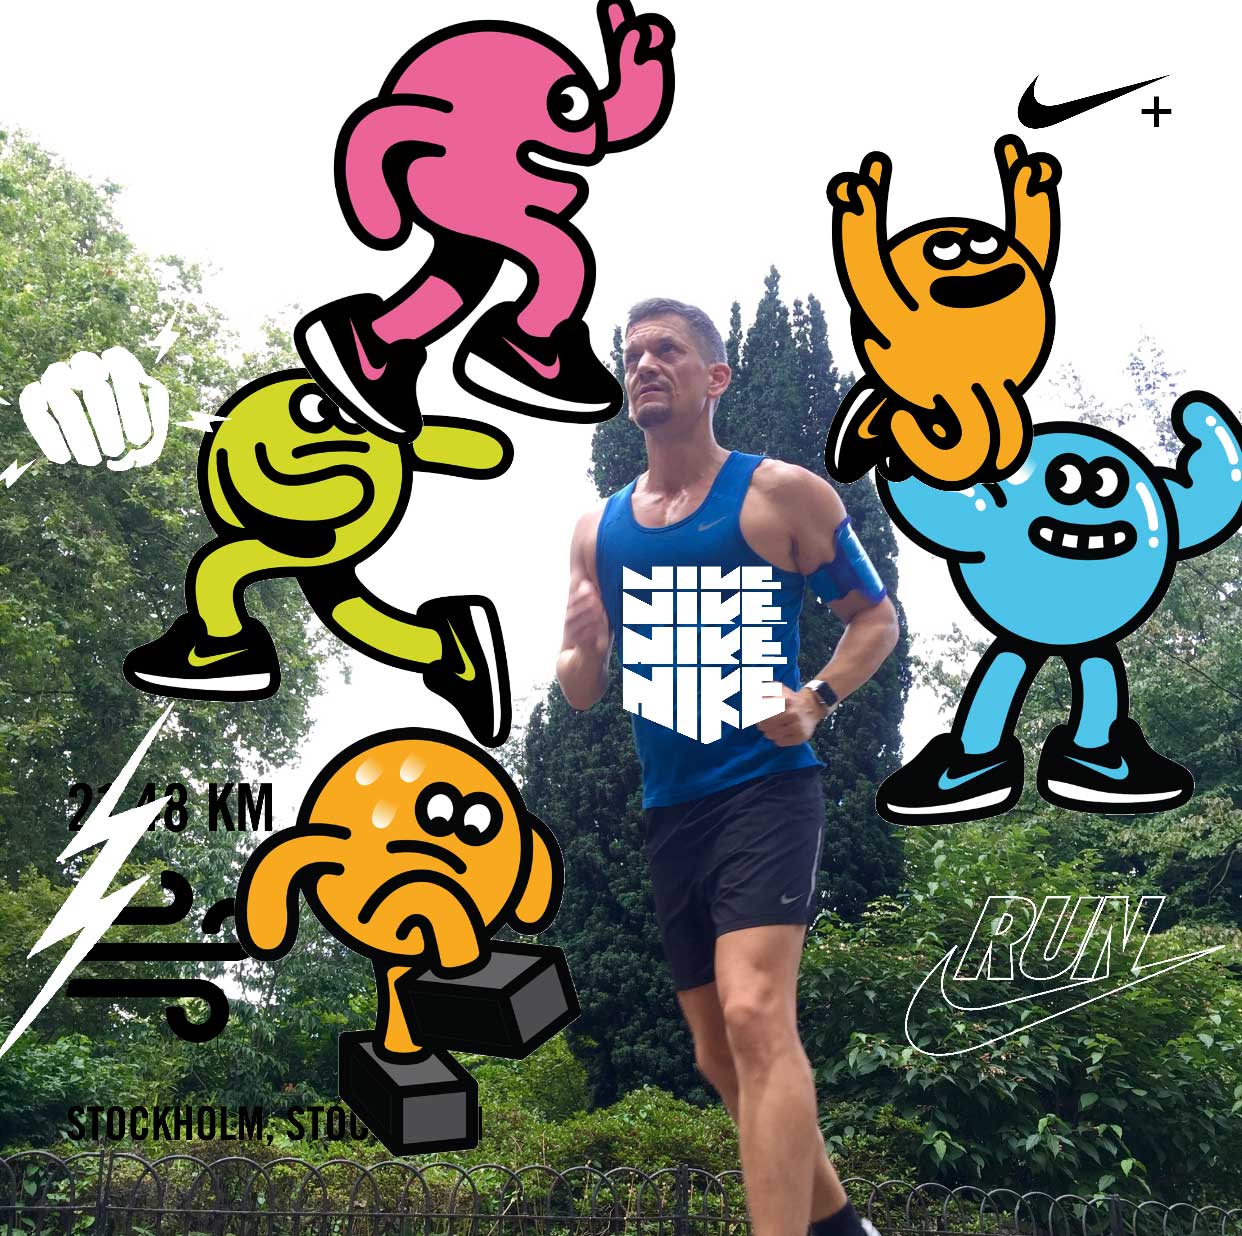 Nike has turned its running app into a dodgy mashup of Instagram and Snapchat